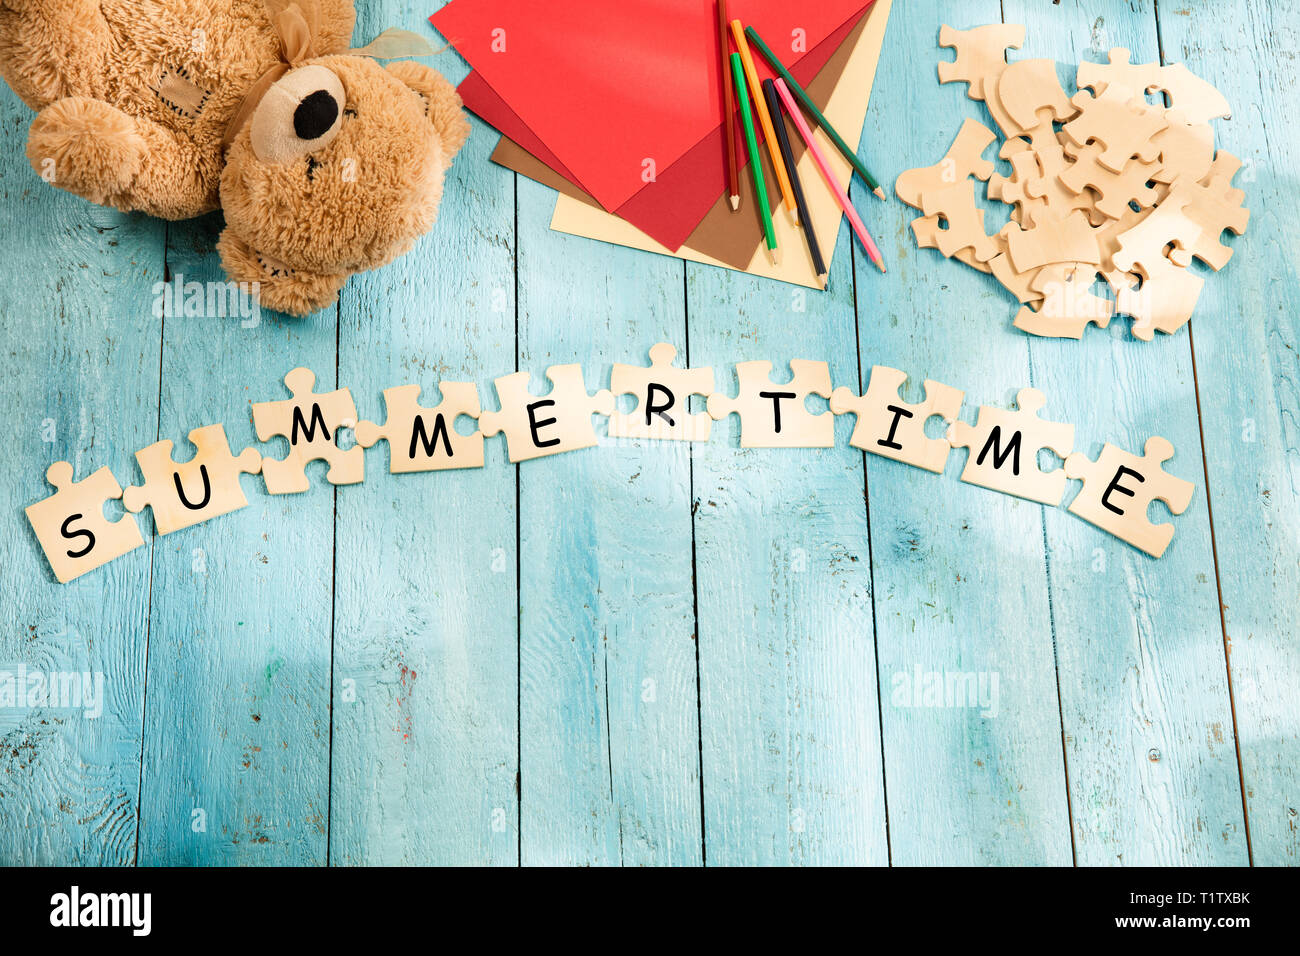 Stationery and words SUMMER TIME made of letters, mock up and pieces of puzzles on wooden background. Travel concept. Summer vacation concepts. Stock Photo